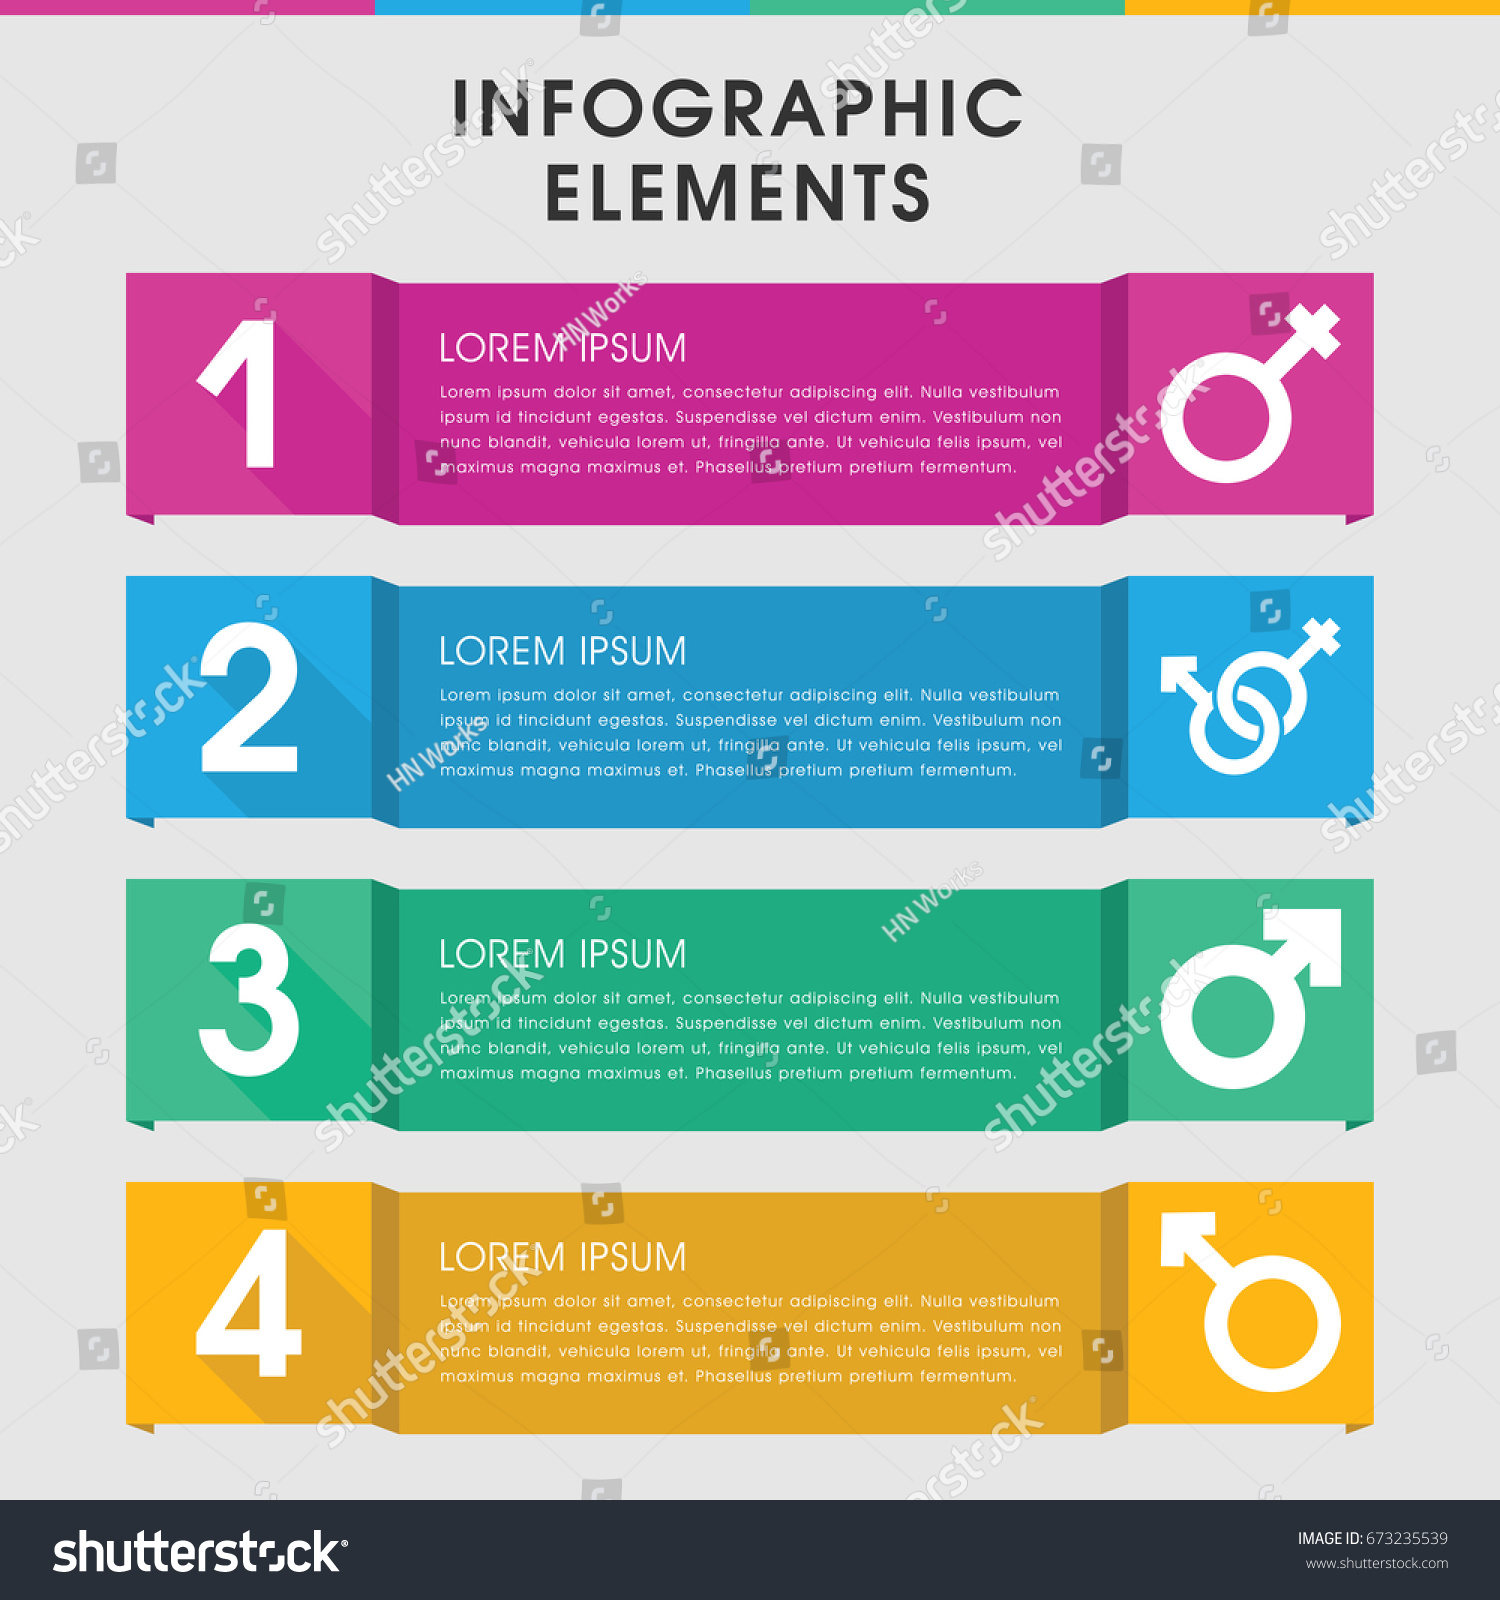 Modern Sexual Infographic Template Infographic Design Stock Vector Royalty Free 673235539 2692